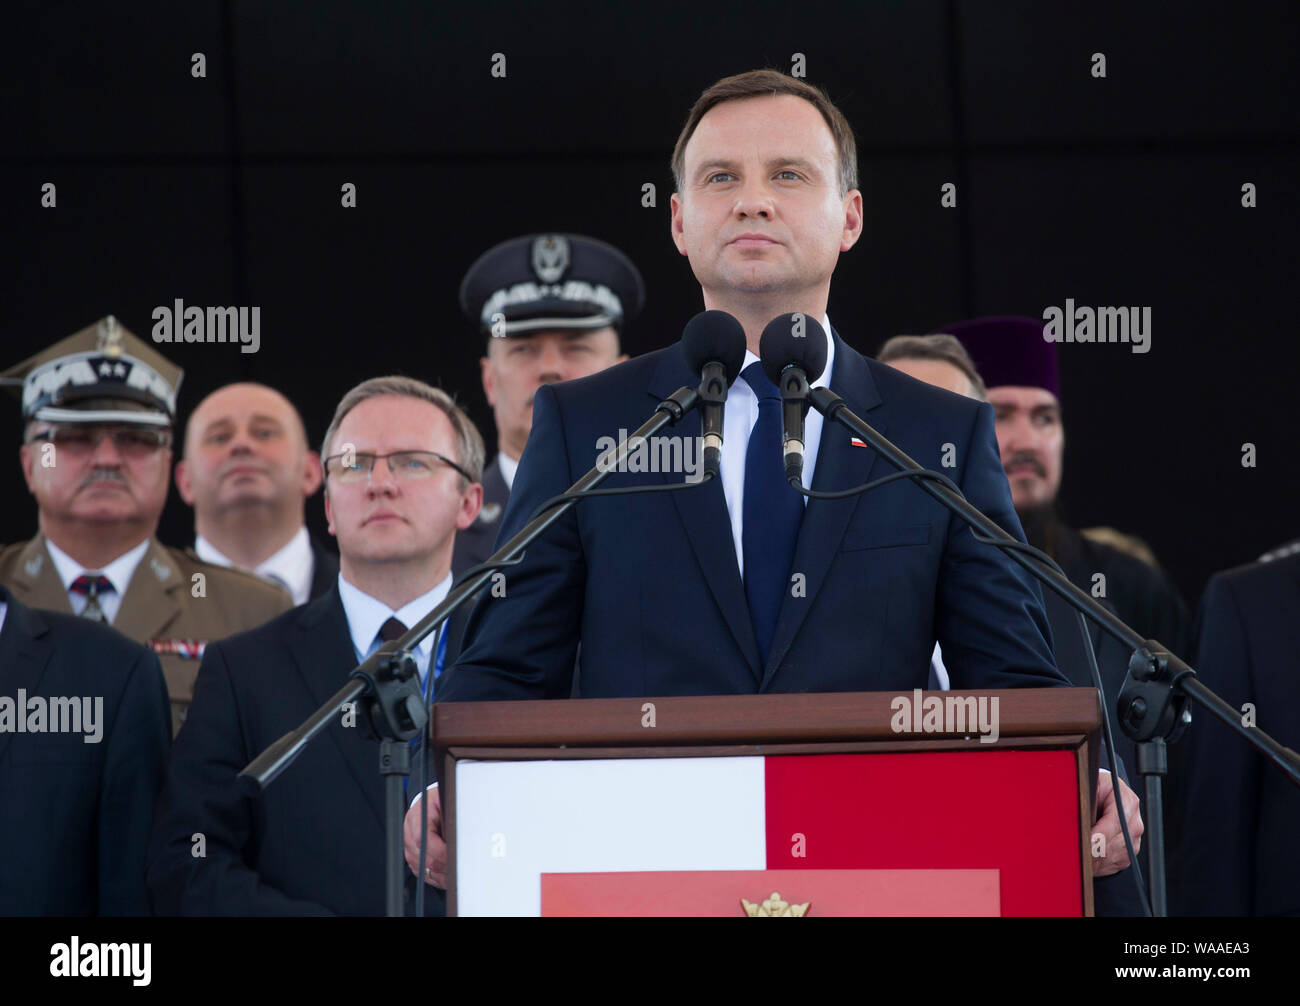 Aug. 6, 2015 Warsaw, presidential inauguration in Poland: Andrzej Duda sworn in as new Polish president. Ceremony at the Marshal Jozef Pilsudski Square - Andrzej Duda took over supreme command over Polish Armed Forces. Stock Photo